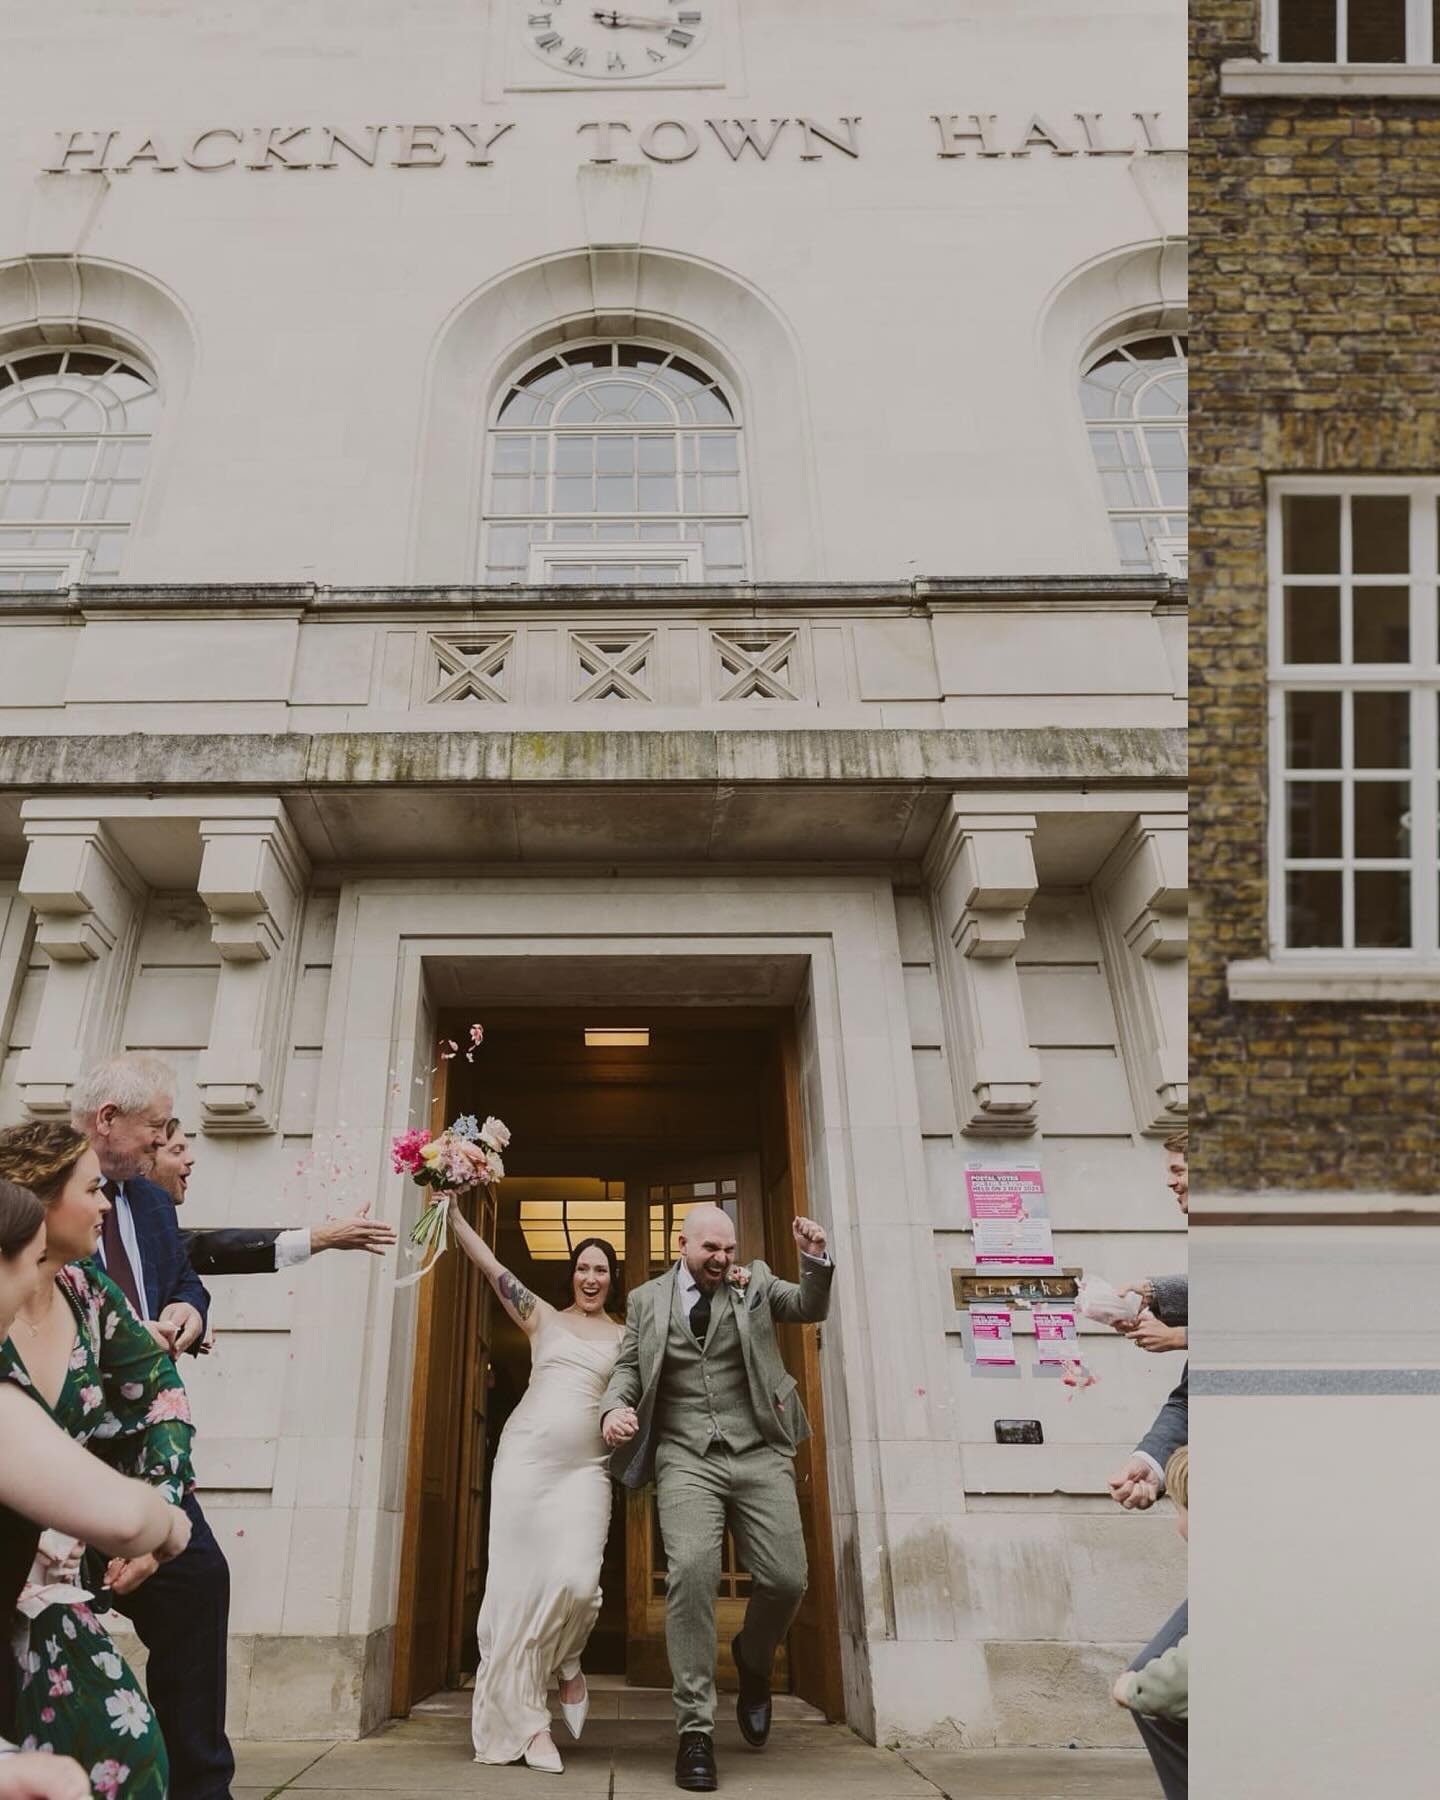 Massive congrats to Kitty &amp; Duncan who tied the knot in Hackney this weekend ❤️ Absolutely loved being part of their day. So much love in the room, especially as it was also their send off before a big move to Oz. 

VENUES:&nbsp;@hackneyvenues @t